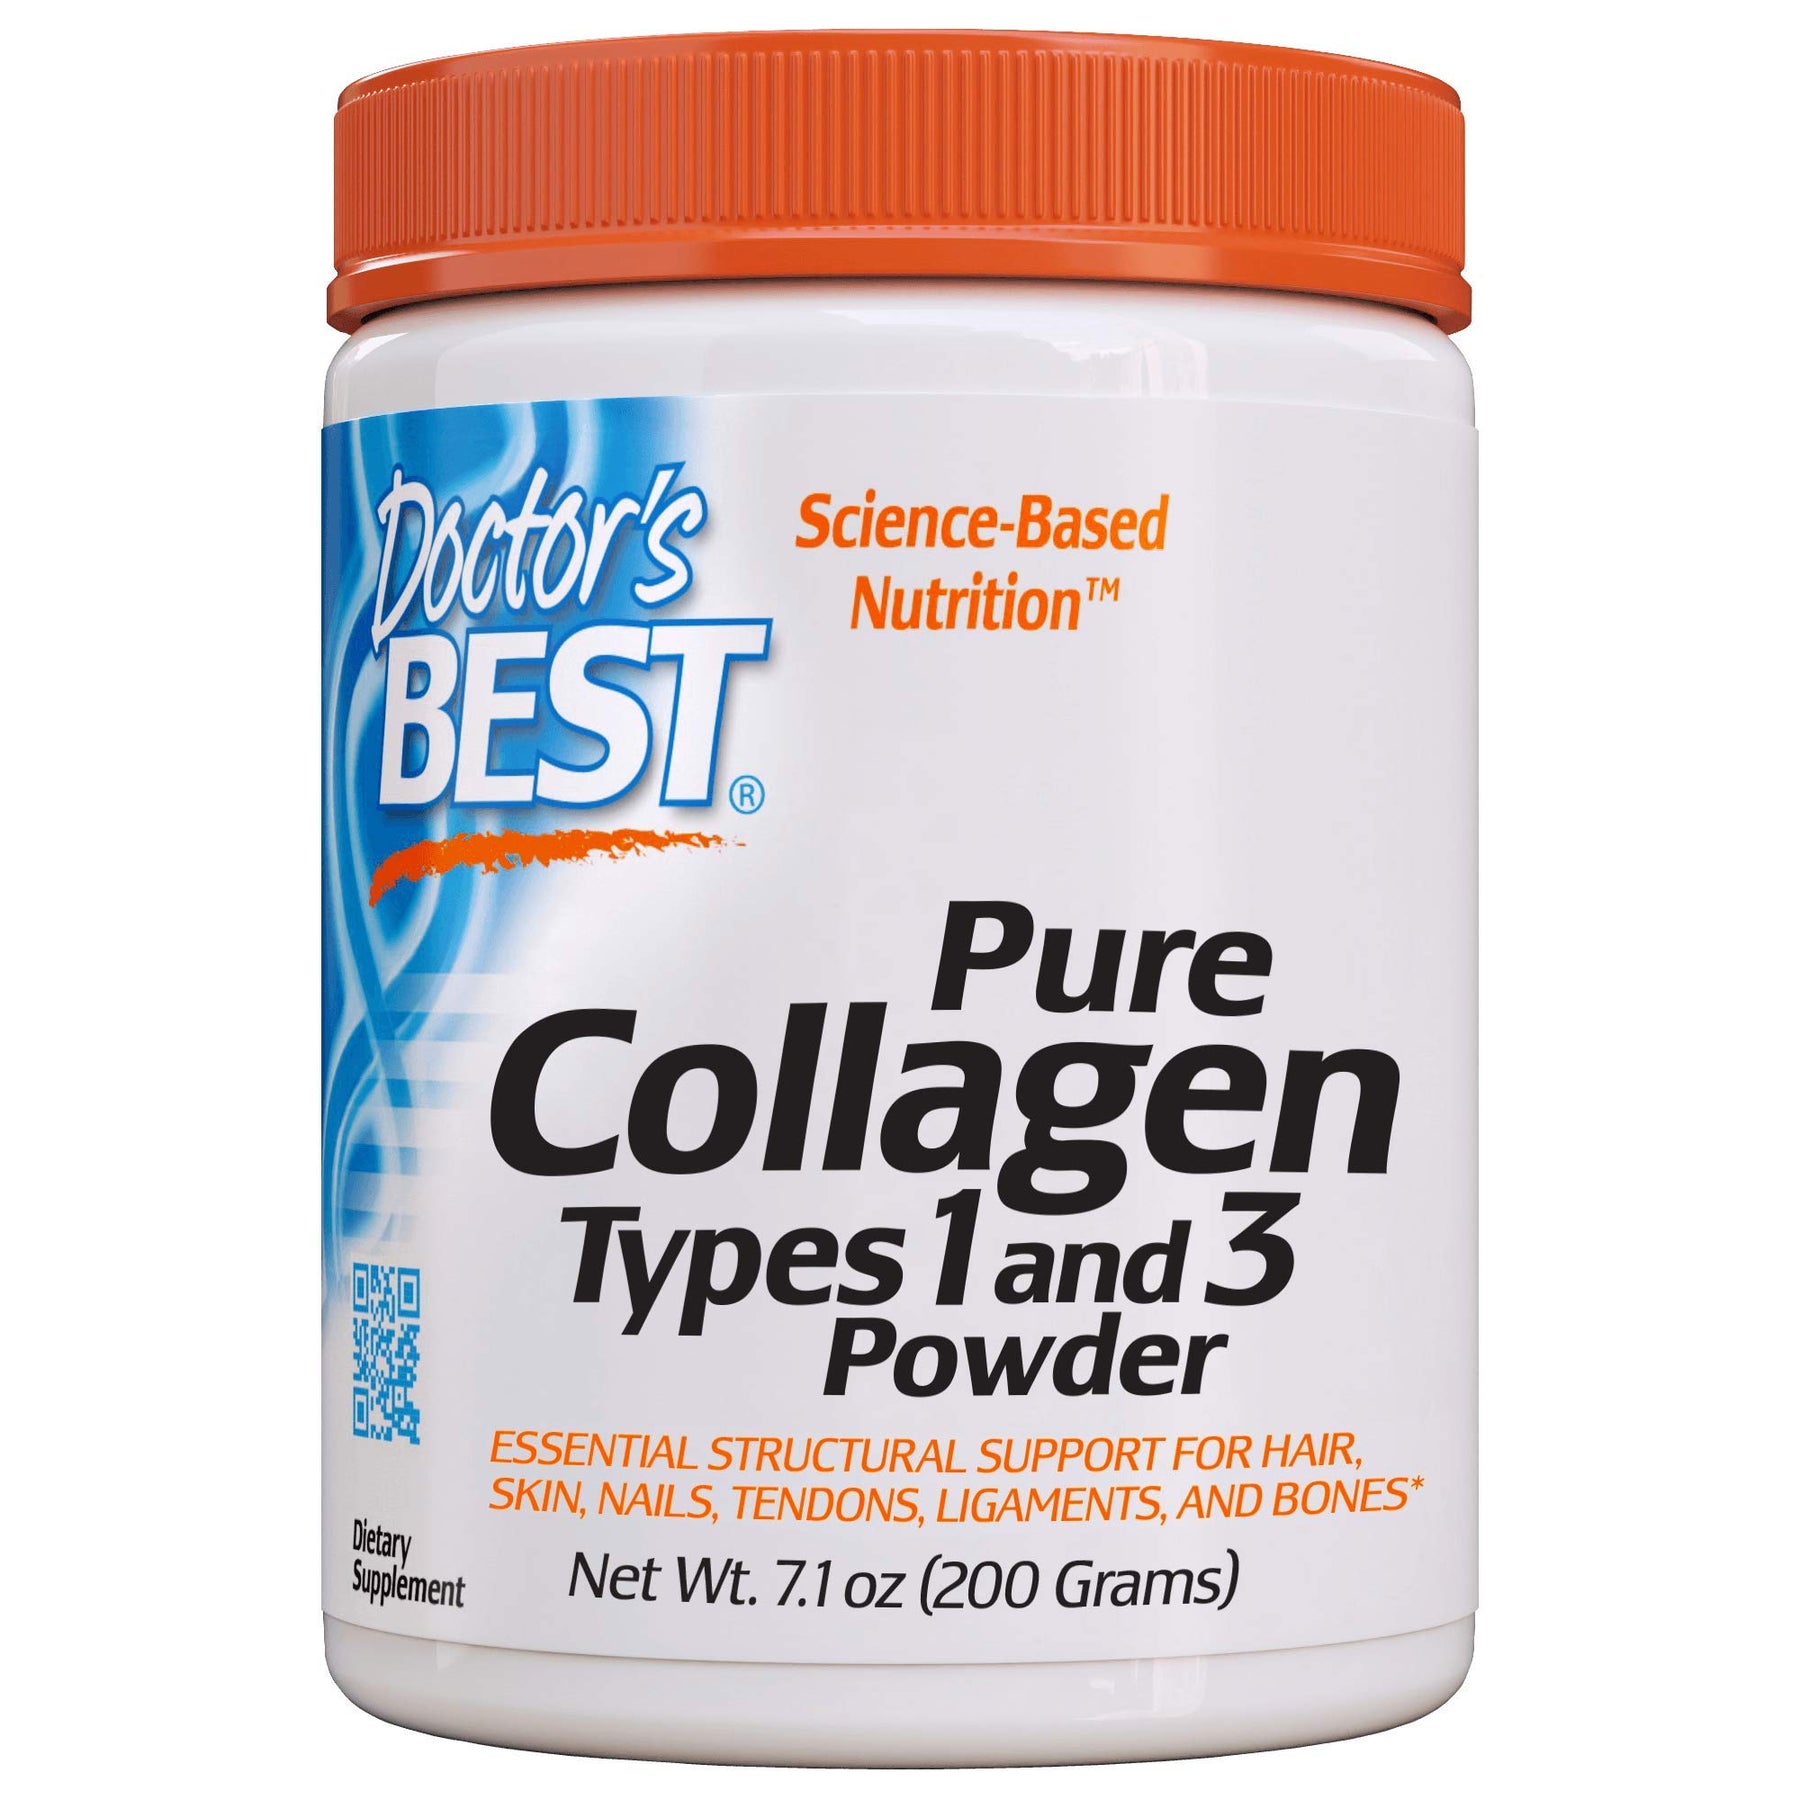 Pure Collagen Types 1 and 3 Powder - Doctor's Best